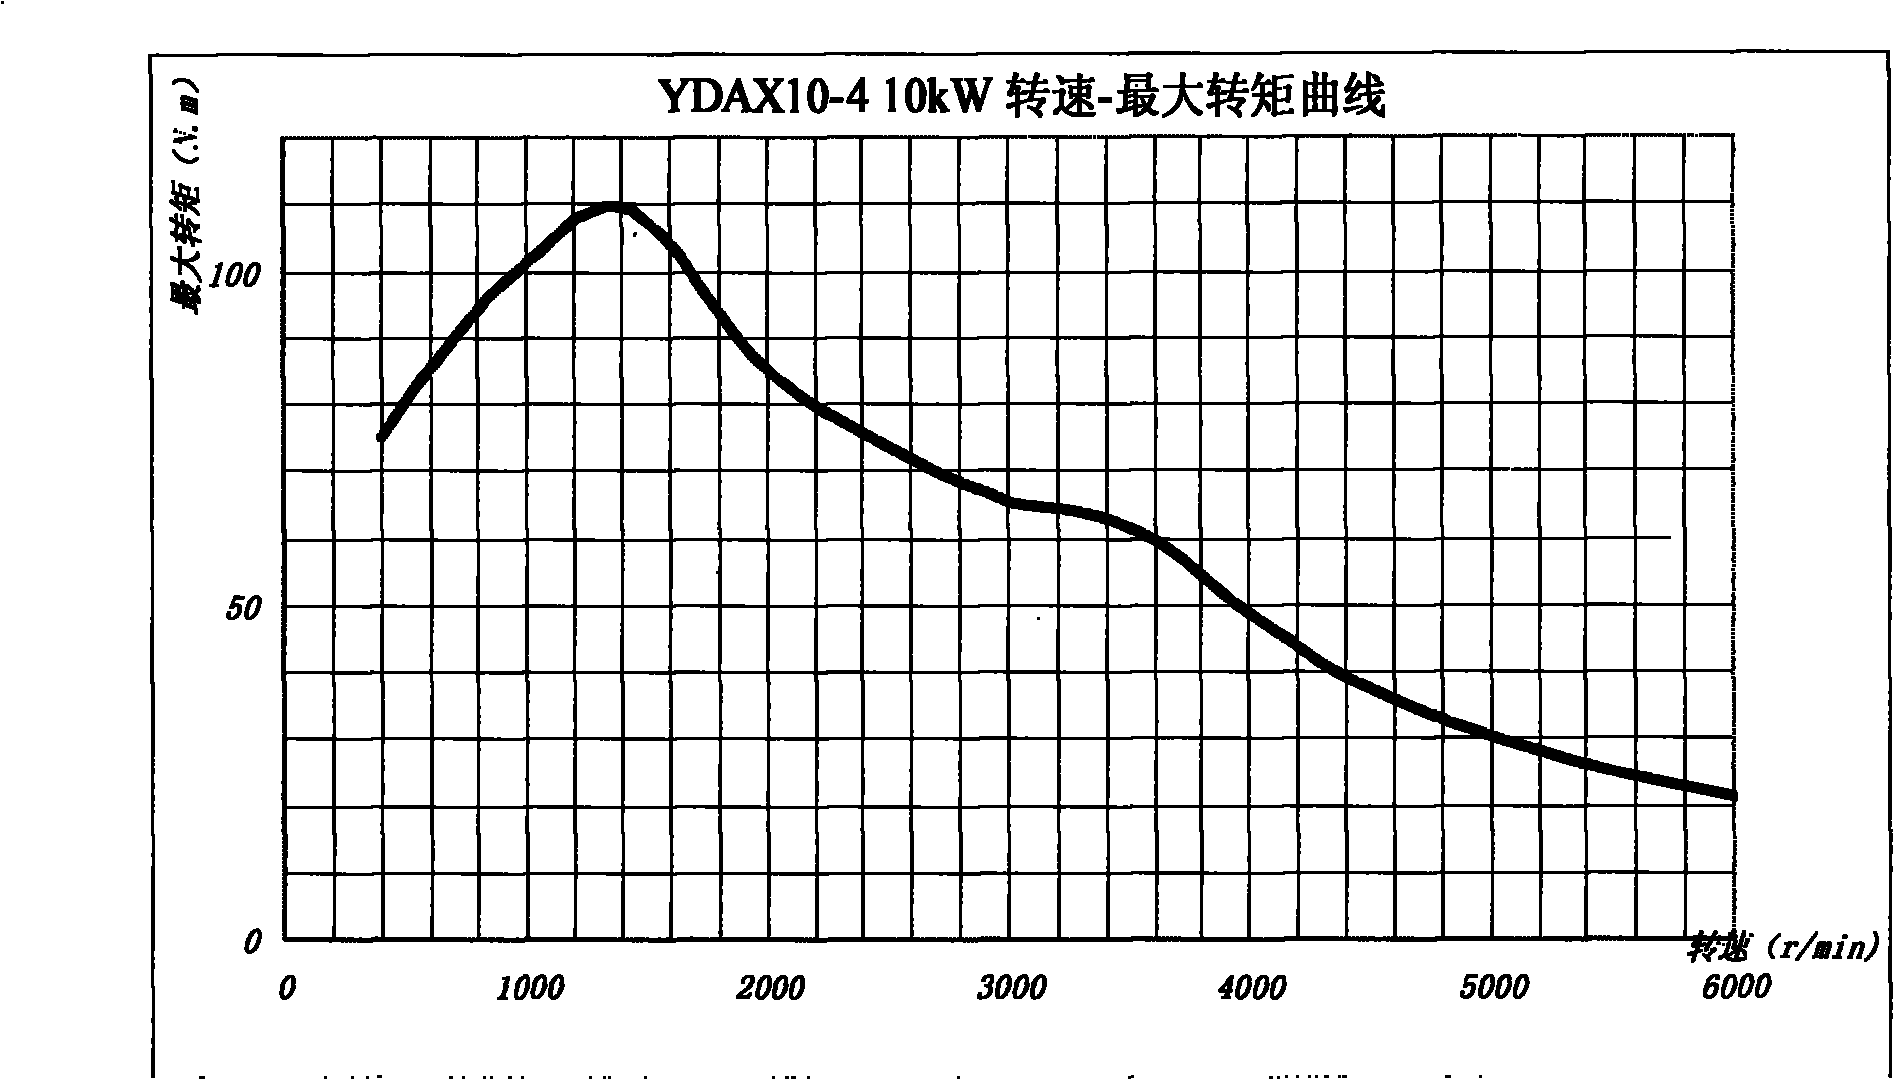 Three-phase AC asynchronous motor for YDAX series of electric automobiles